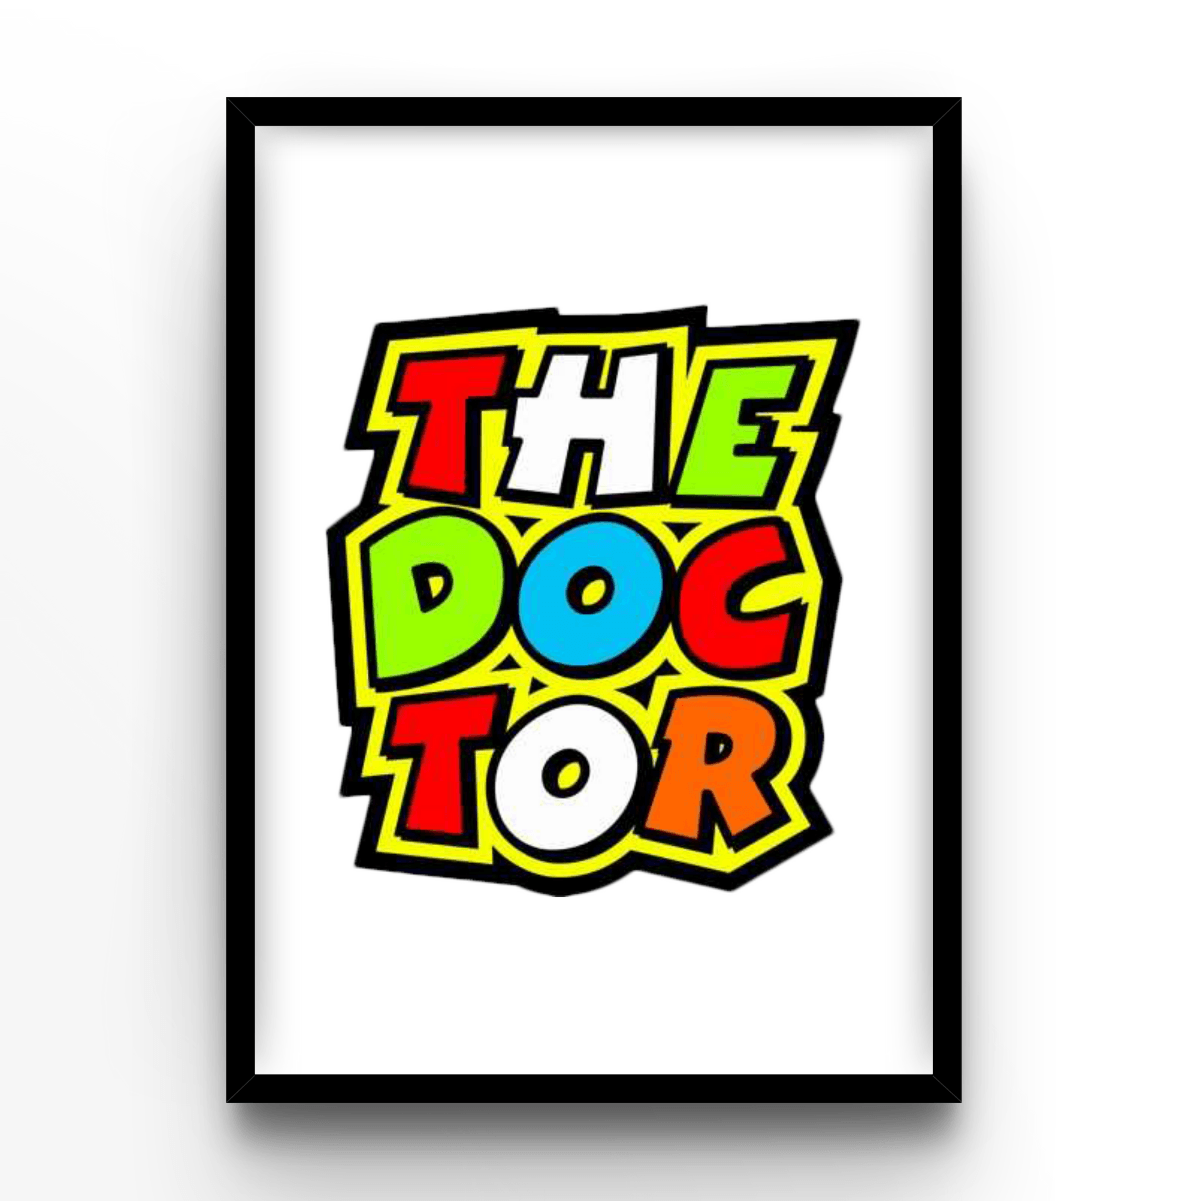 Rossi The Doc - A4, A3, A2 Posters Base - Poster Print Shop / Art Prints / PostersBase